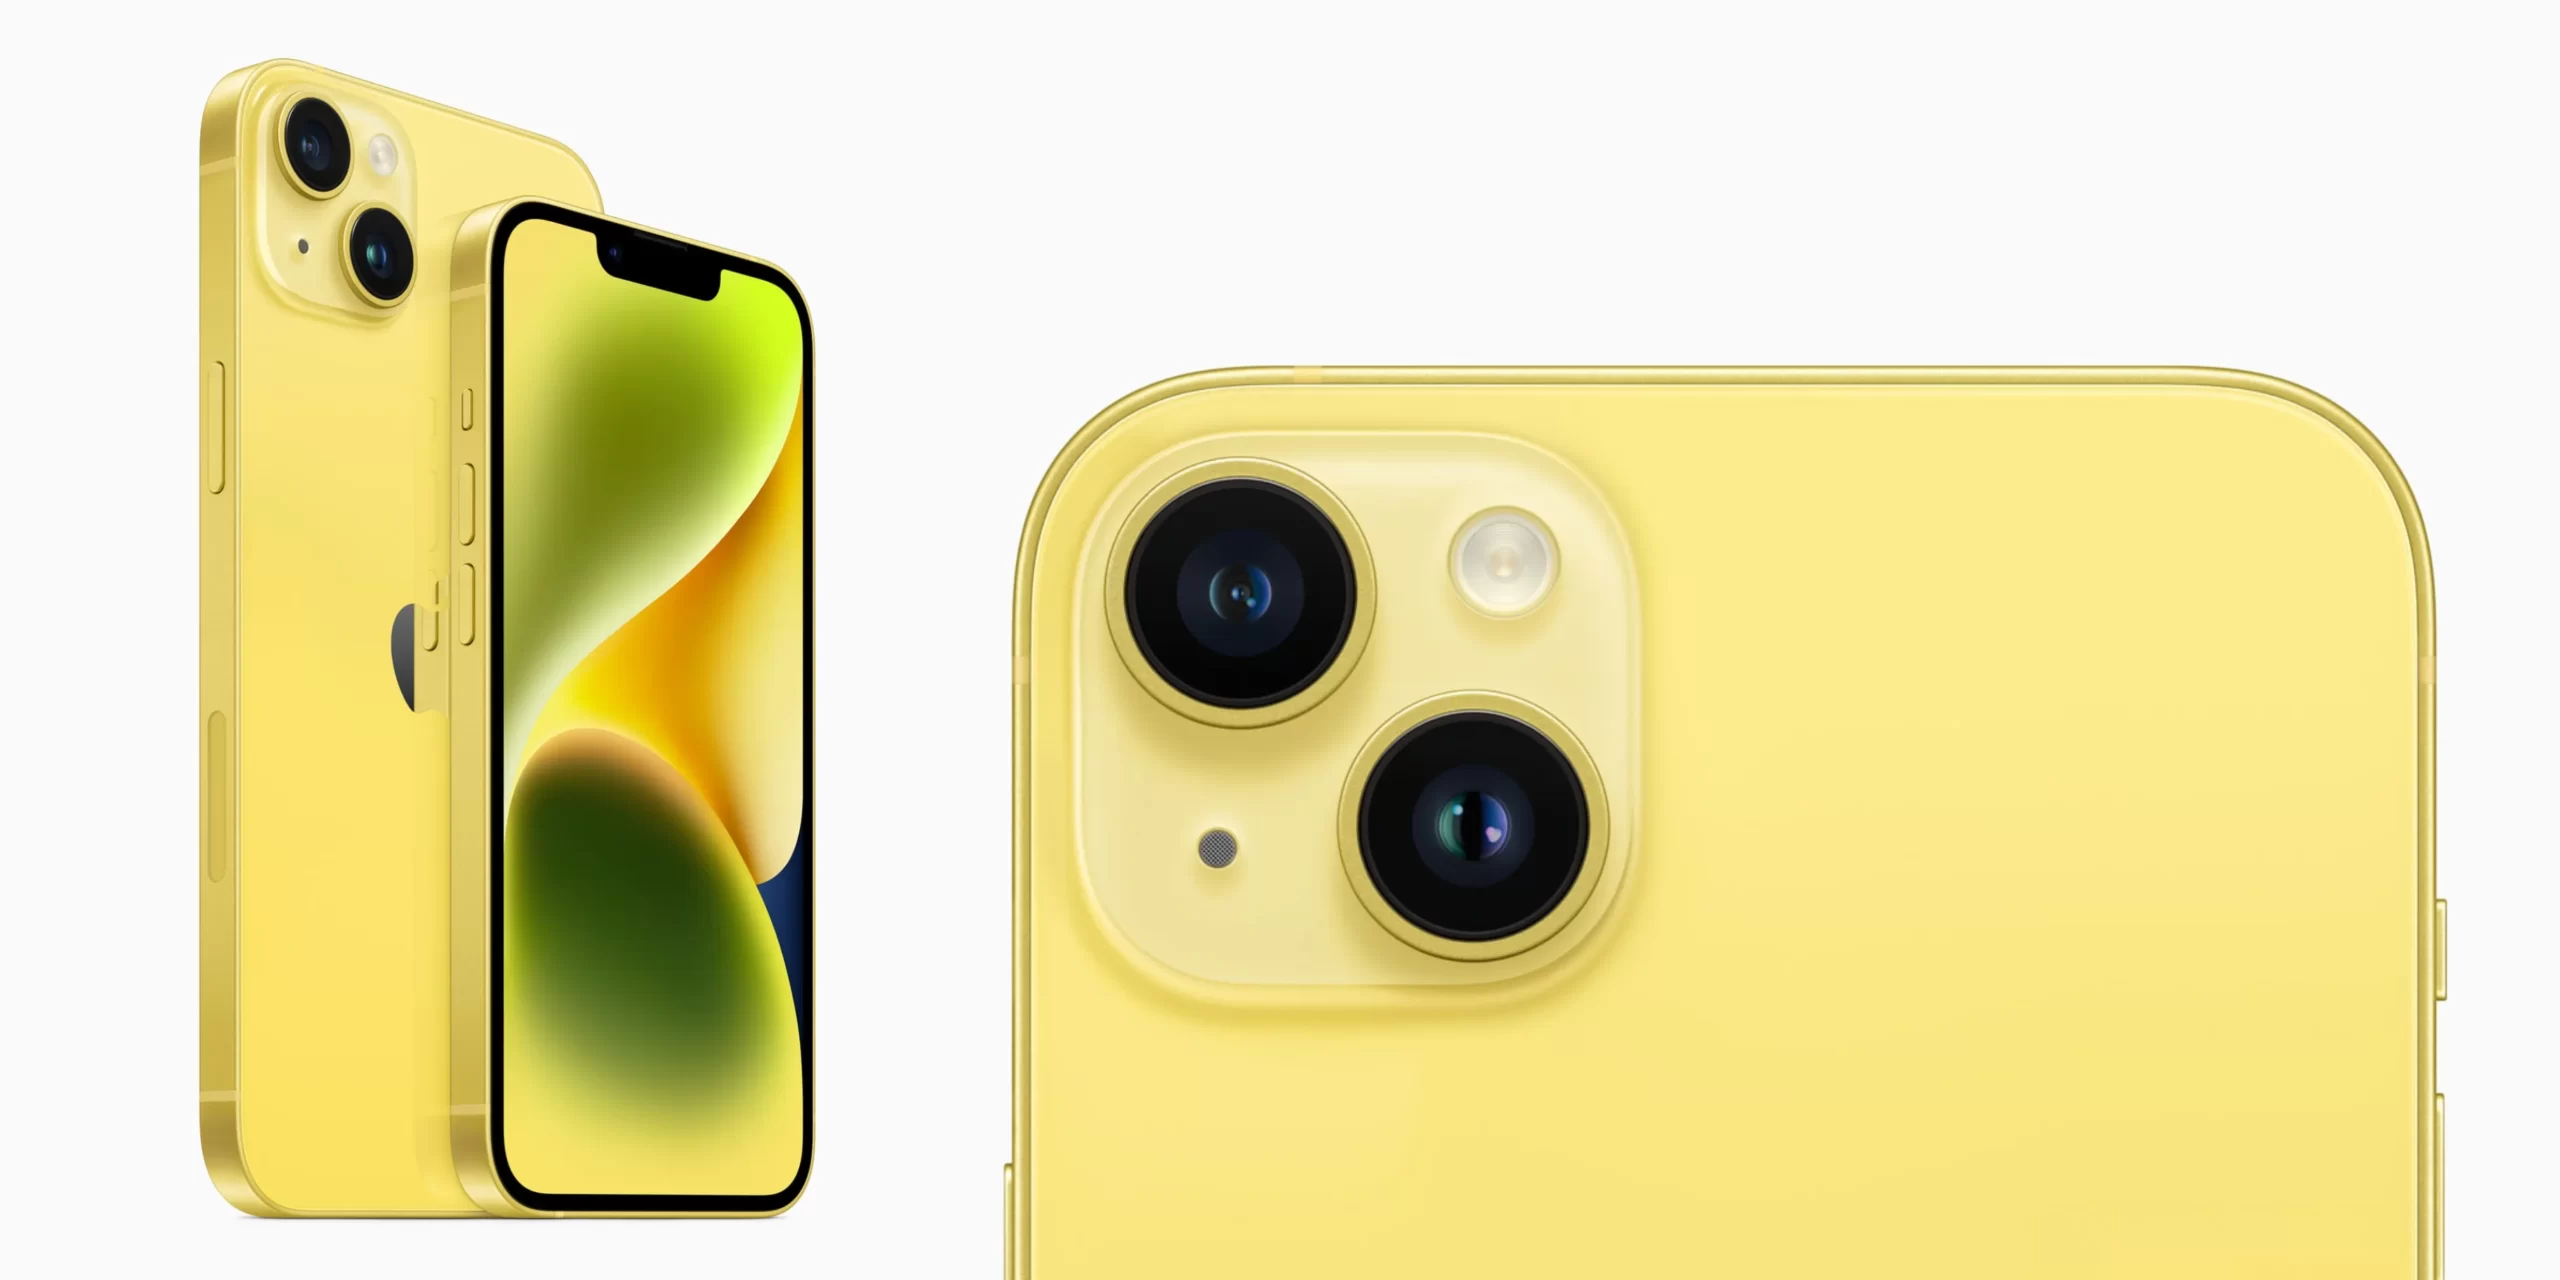 The new Apple Yellow iPhone has surpassed all competitors in the market